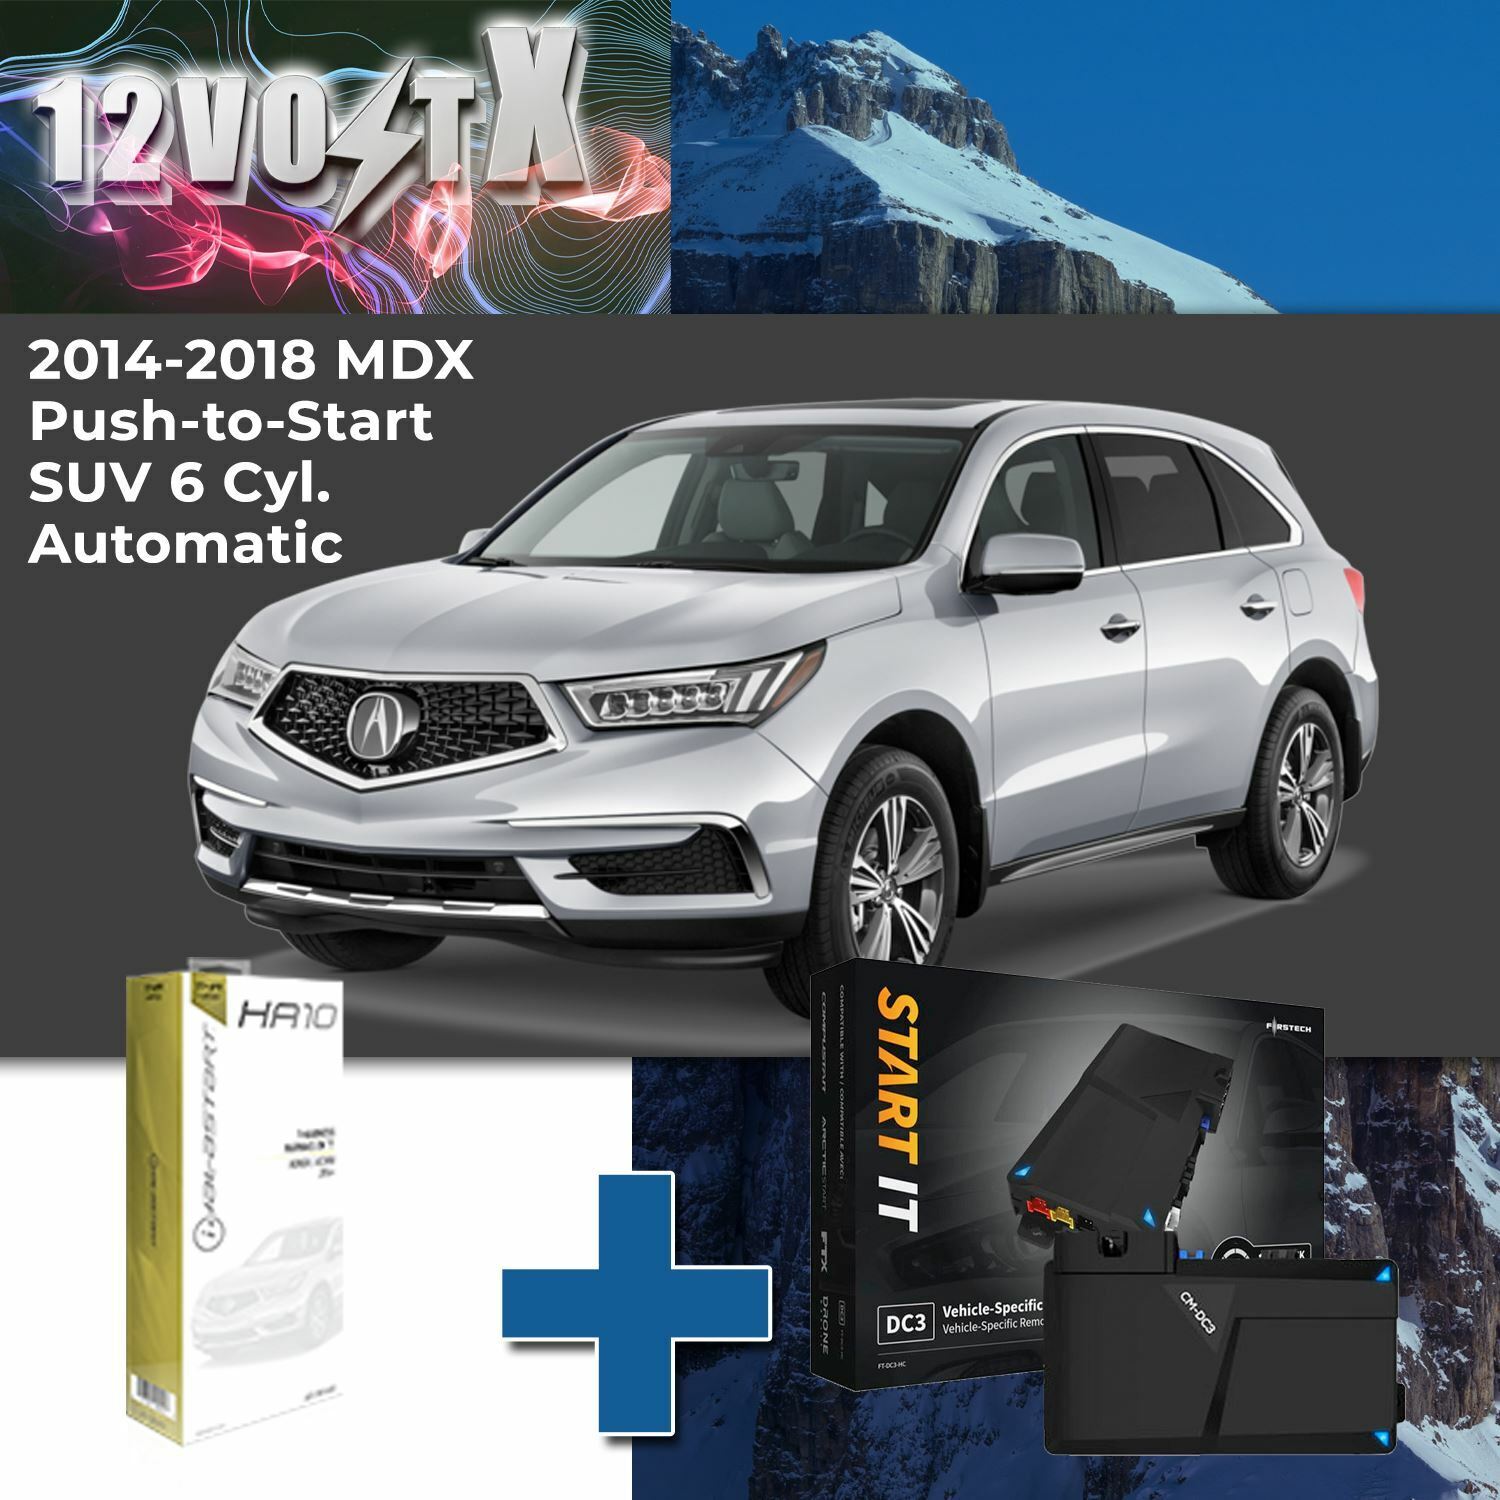 Remote Start System for 2014 Acura MDX Push-to-Start SUV 6 Cyl. Automatic